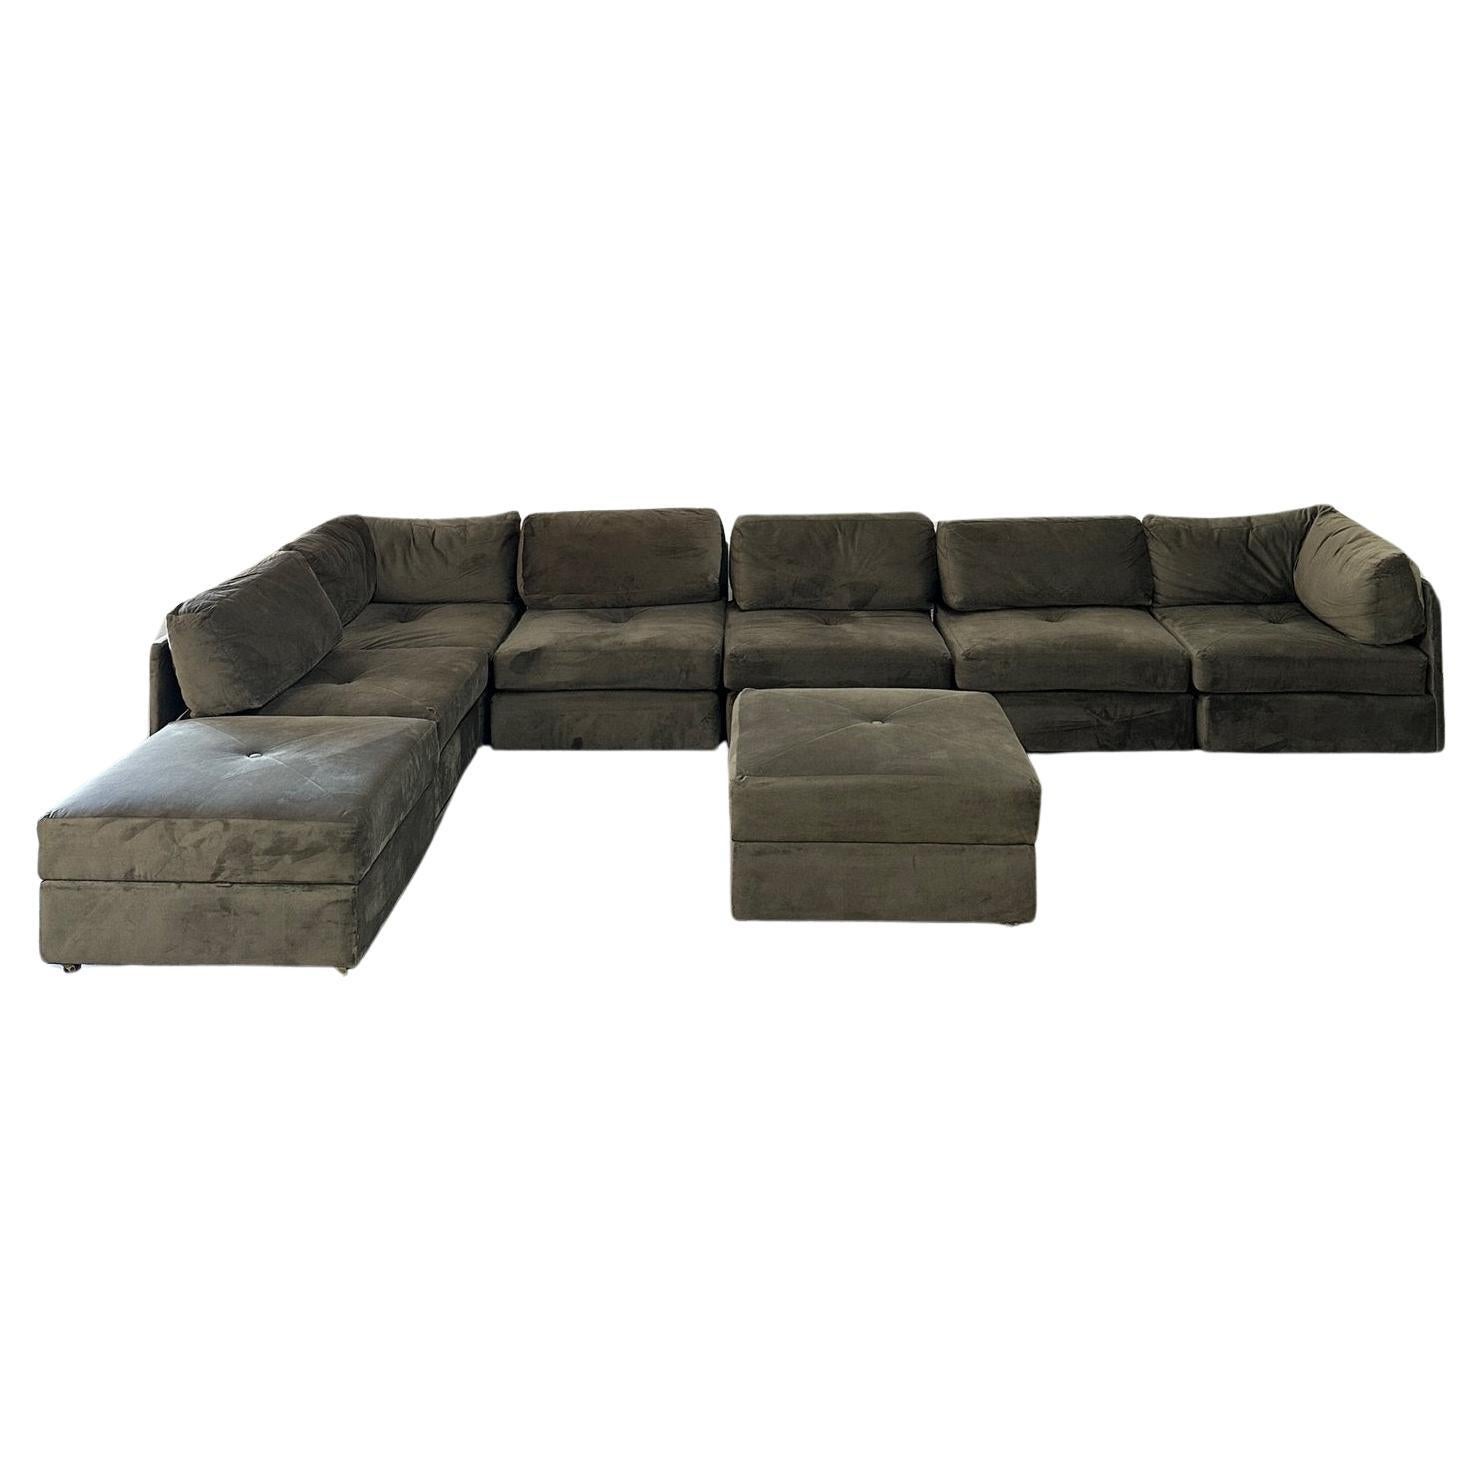 Vintage Modular Eight Piece Sectional For Sale